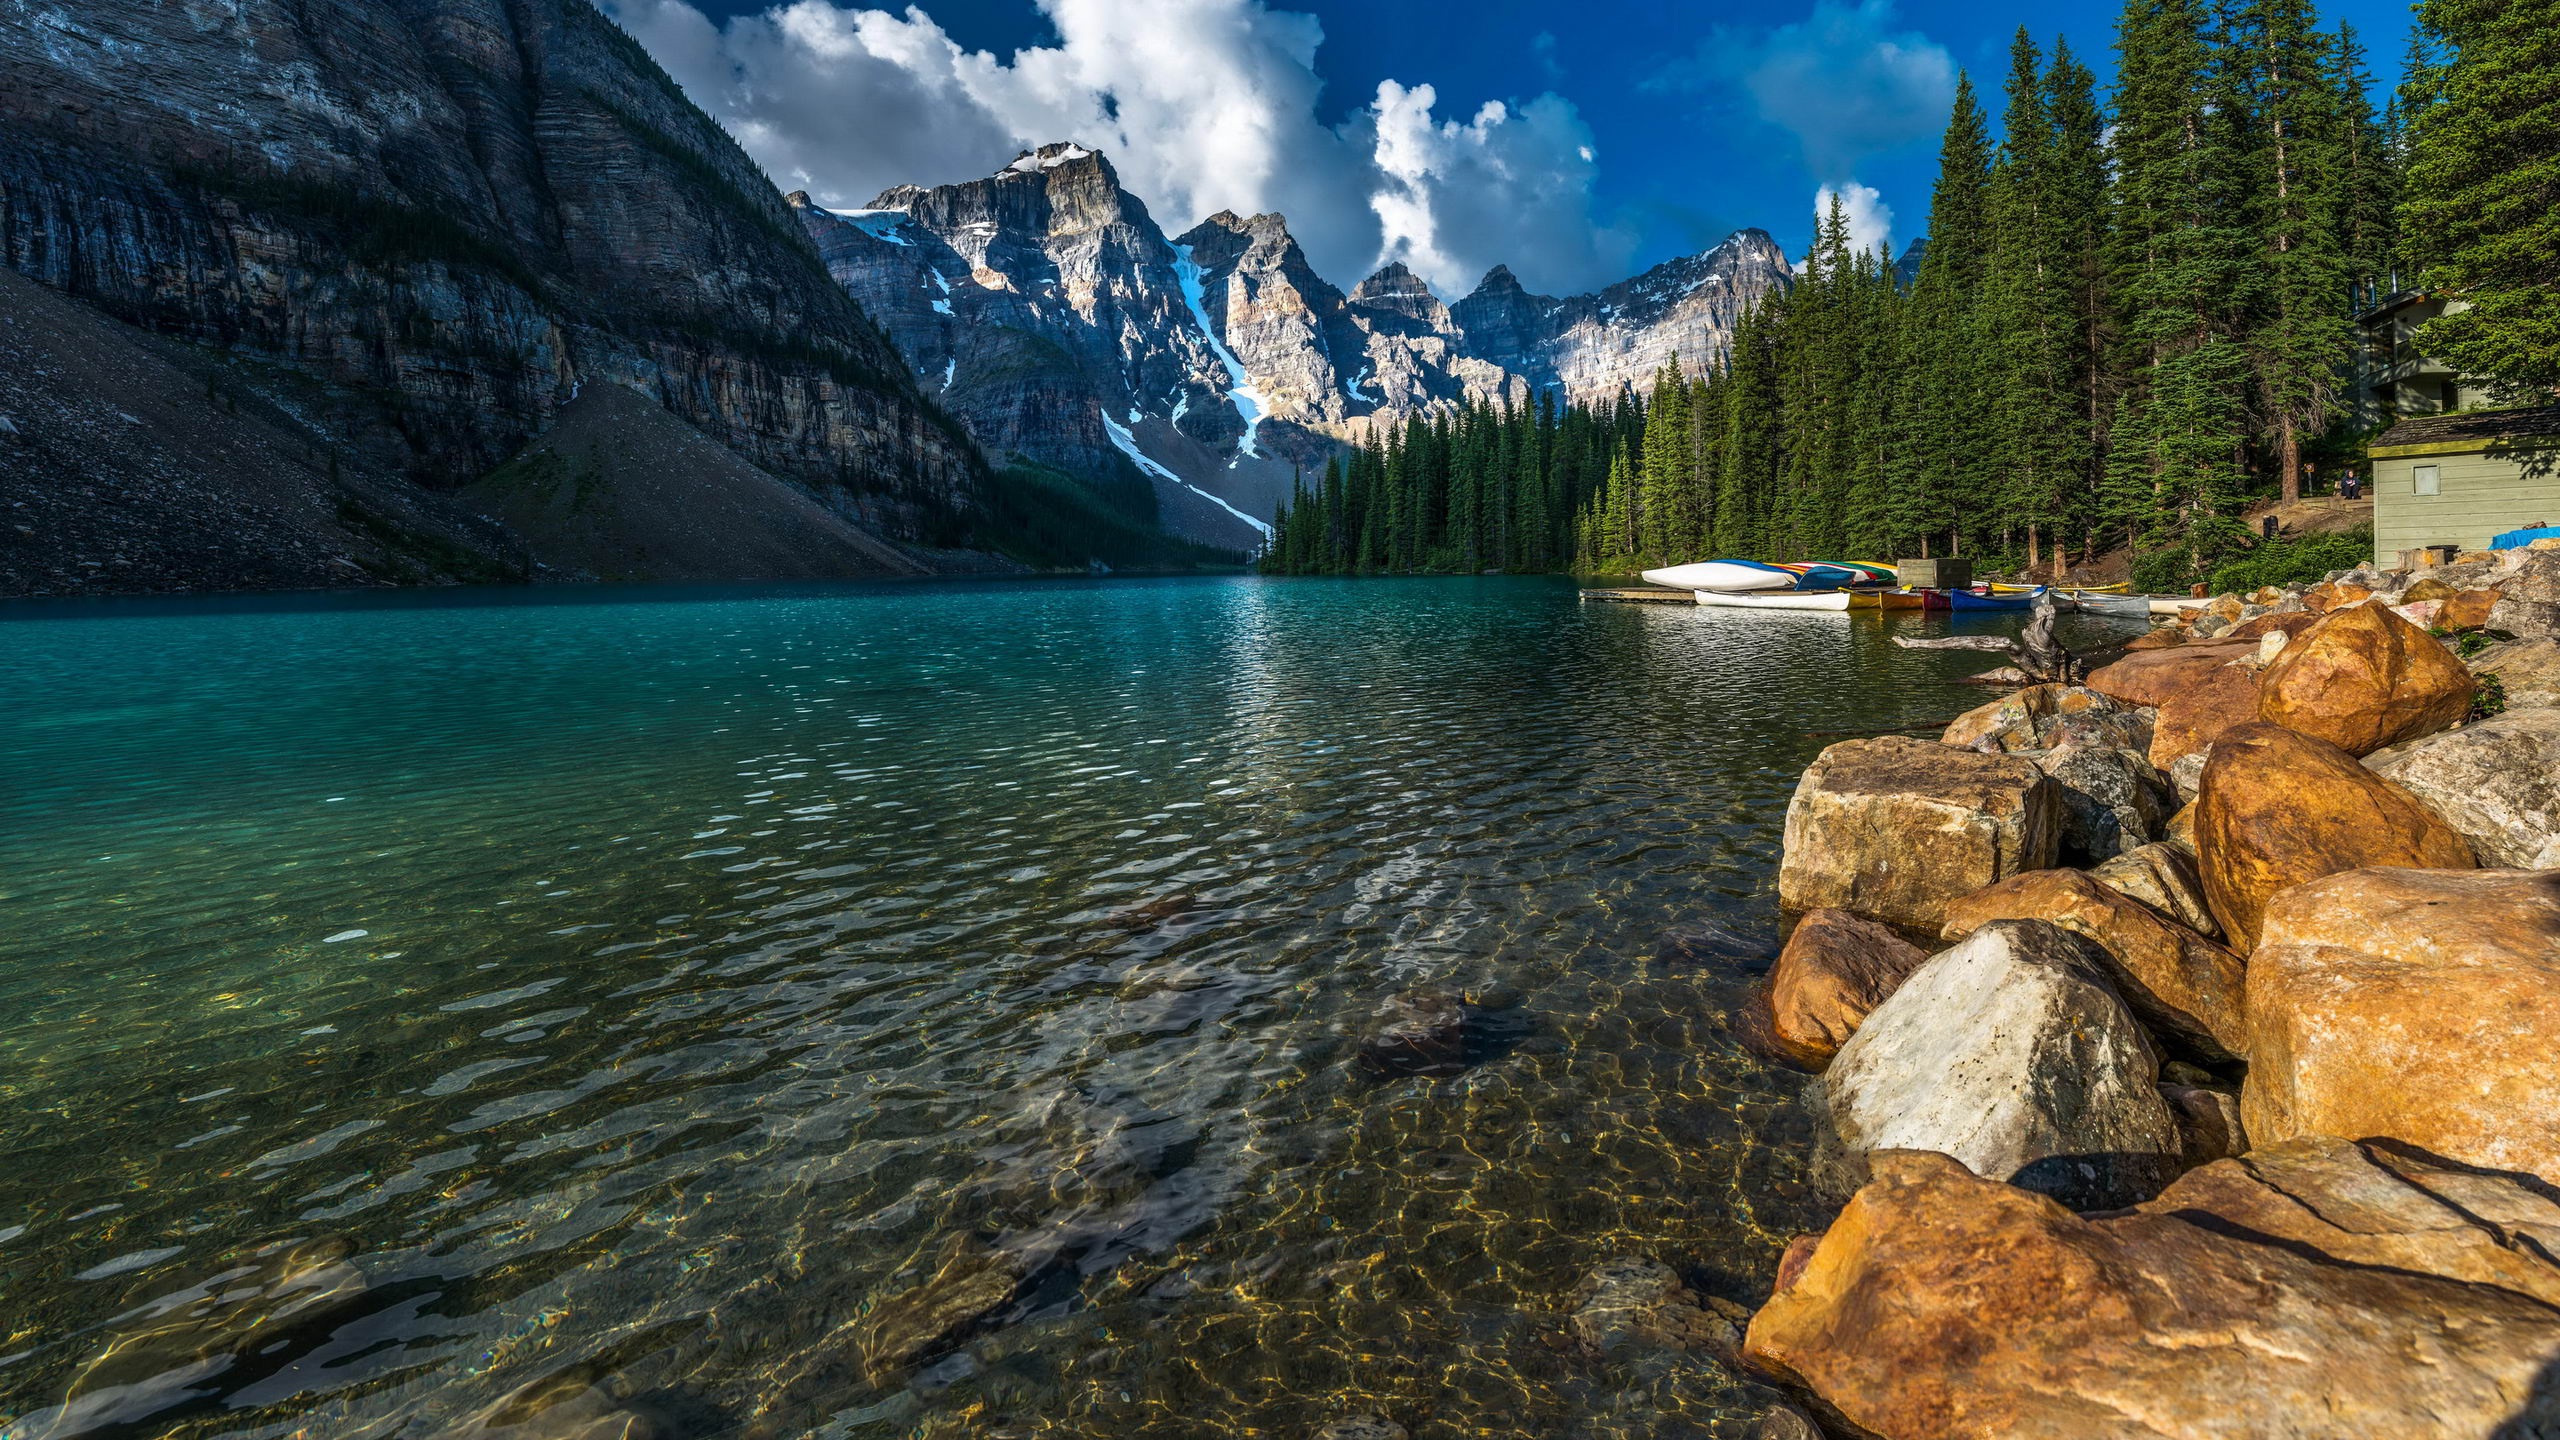 General 2560x1440 landscape mountains lake forest nature Banff National Park Moraine Lake Canada